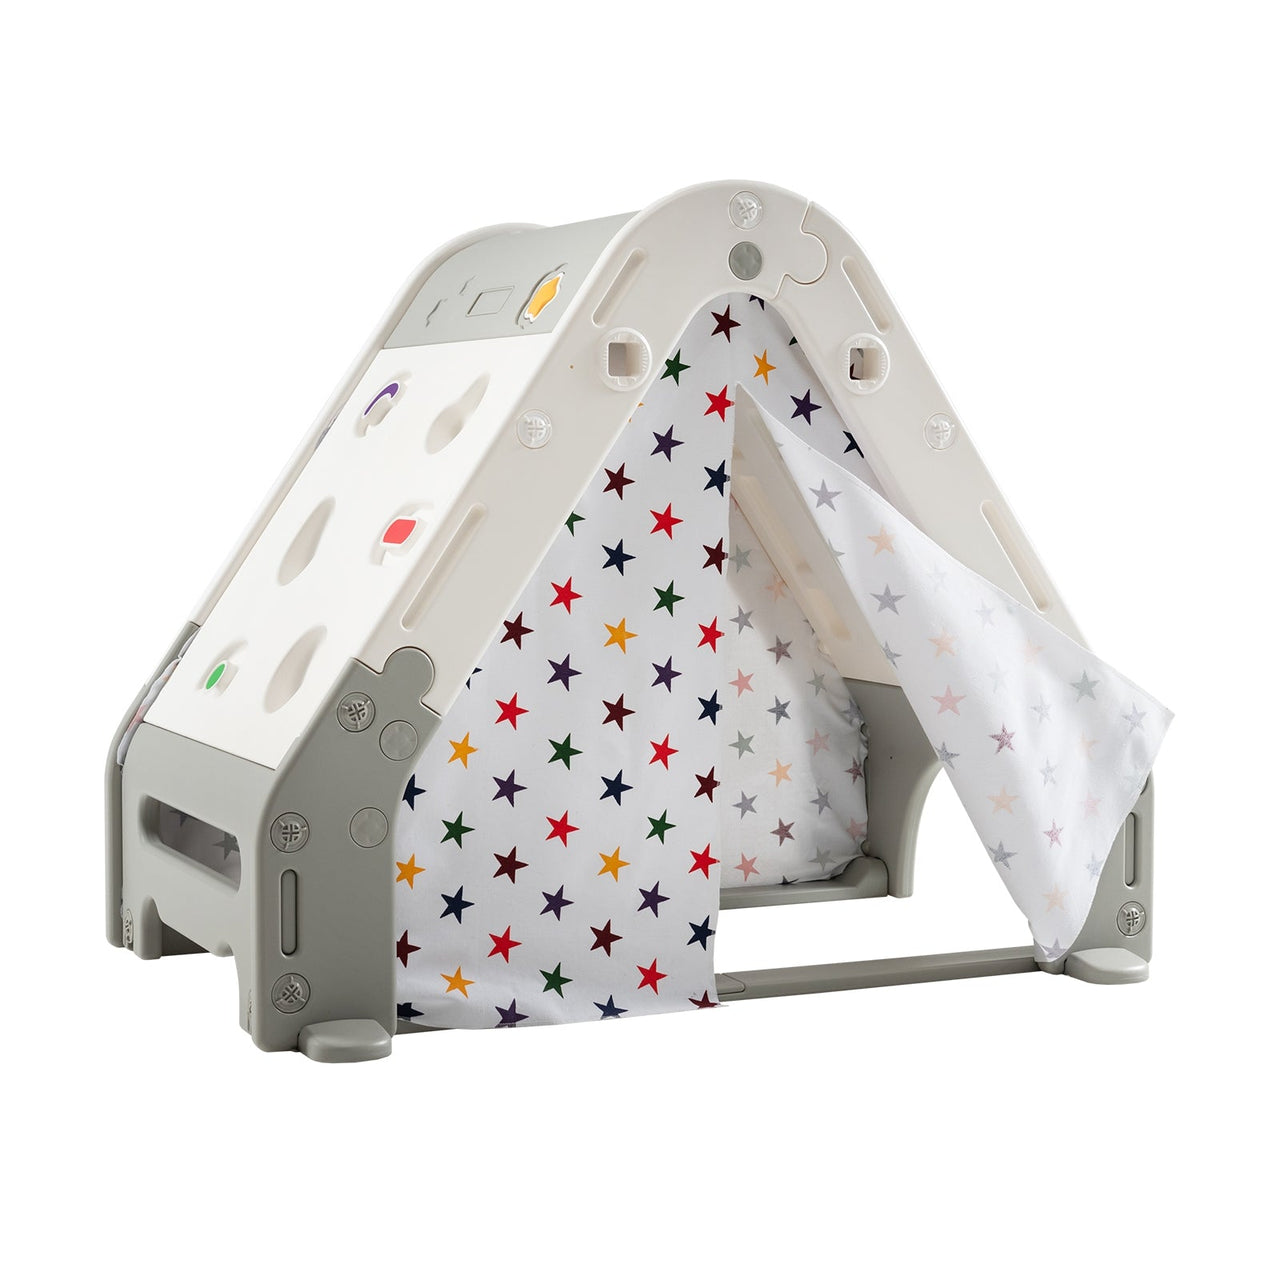 Kid's Triangle Climber with Tent Cover and with Climbing Wall